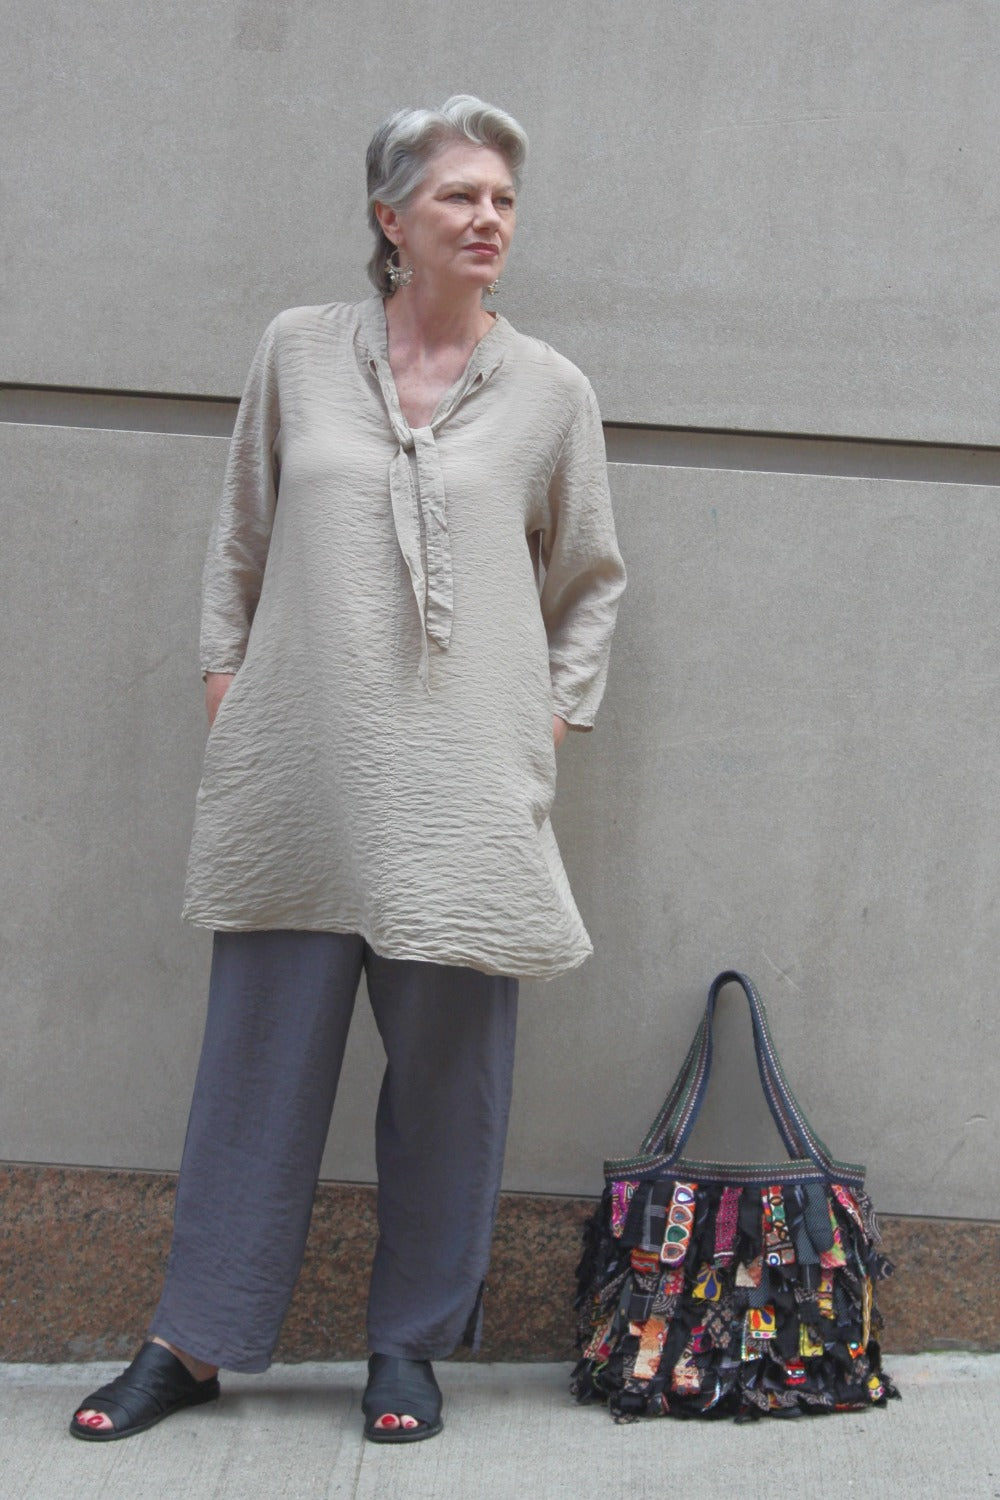 Loose cut natural color tunic with front tie worn with grey pants. The woman is standing on the street with a tote bag resting beside her.